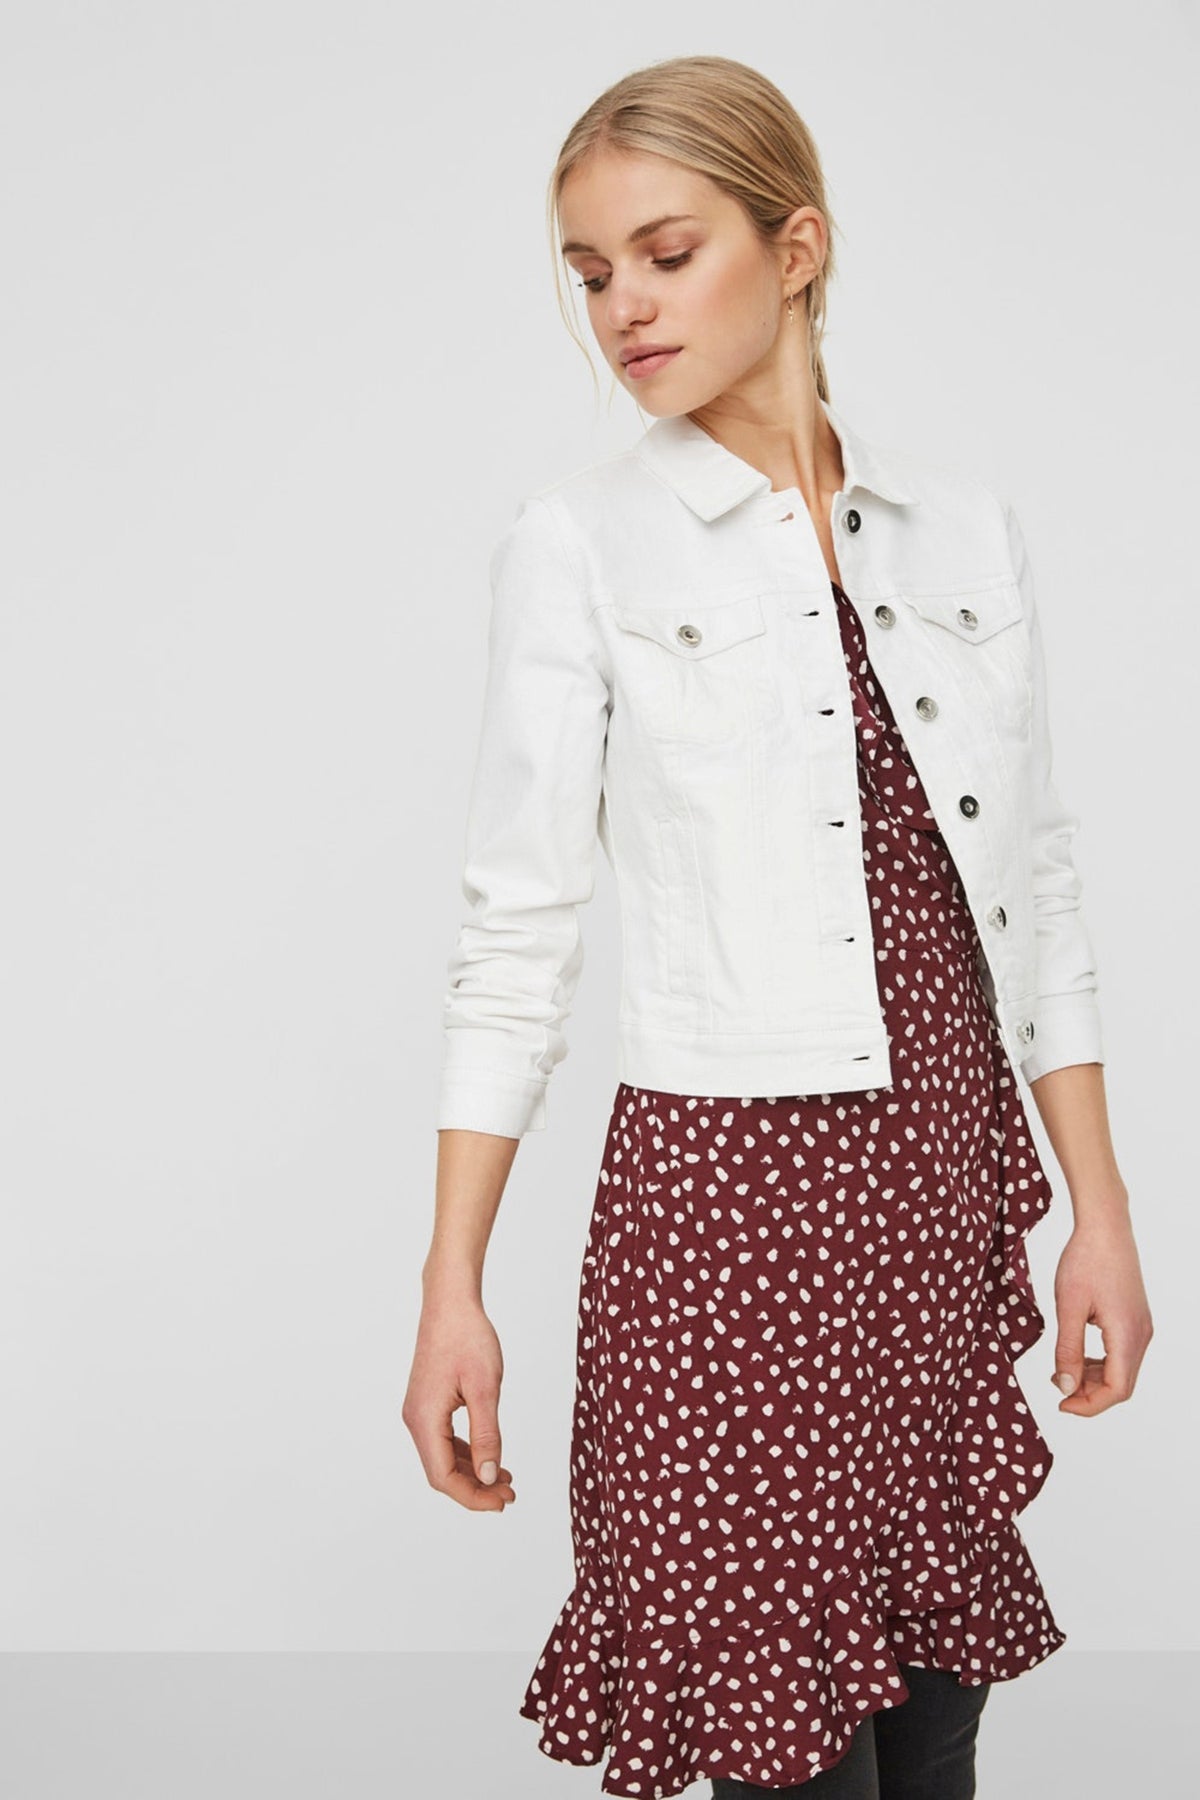 Fitted white denim jacket with button-up closure, worn over a burgundy polka dot dress, showcasing a stylish casual outfit.